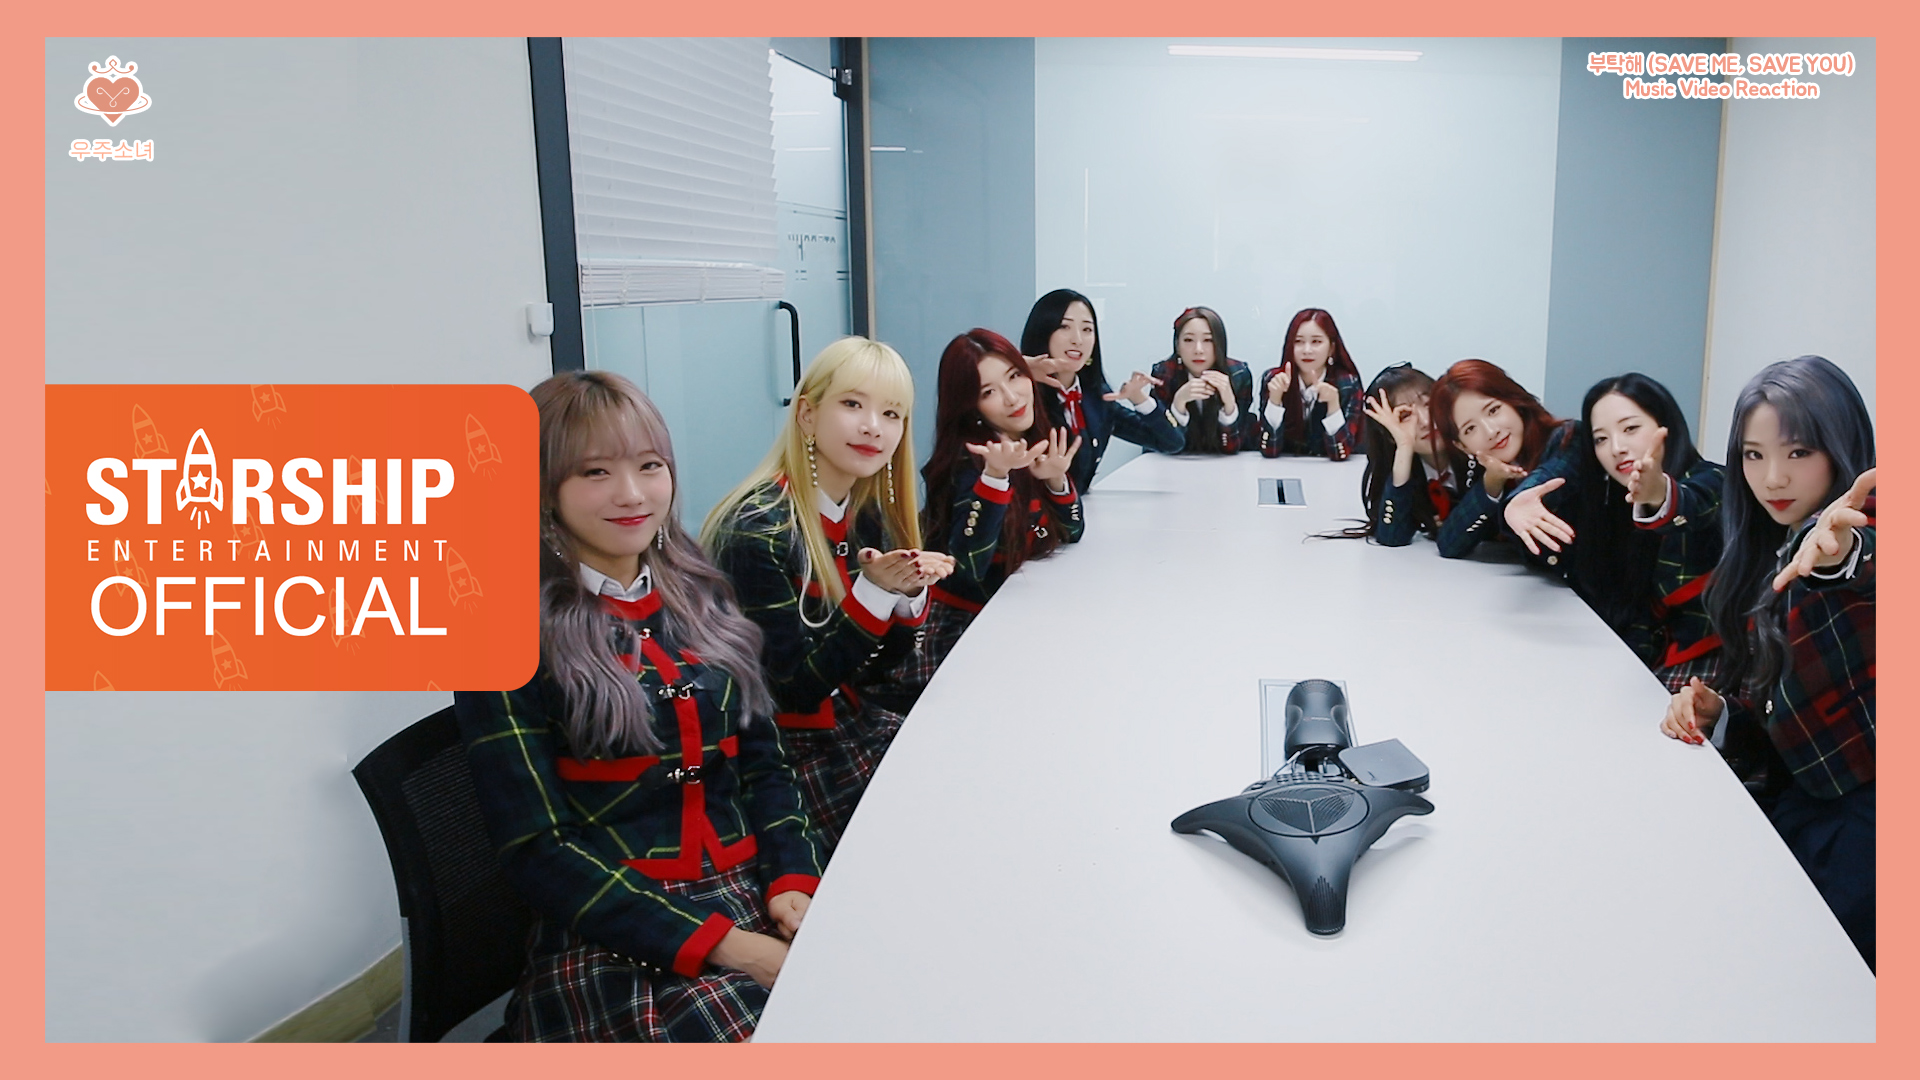 [Special Clip] 우주소녀 (WJSN) - 부탁해 (SAVE ME, SAVE YOU) Music Video Reaction